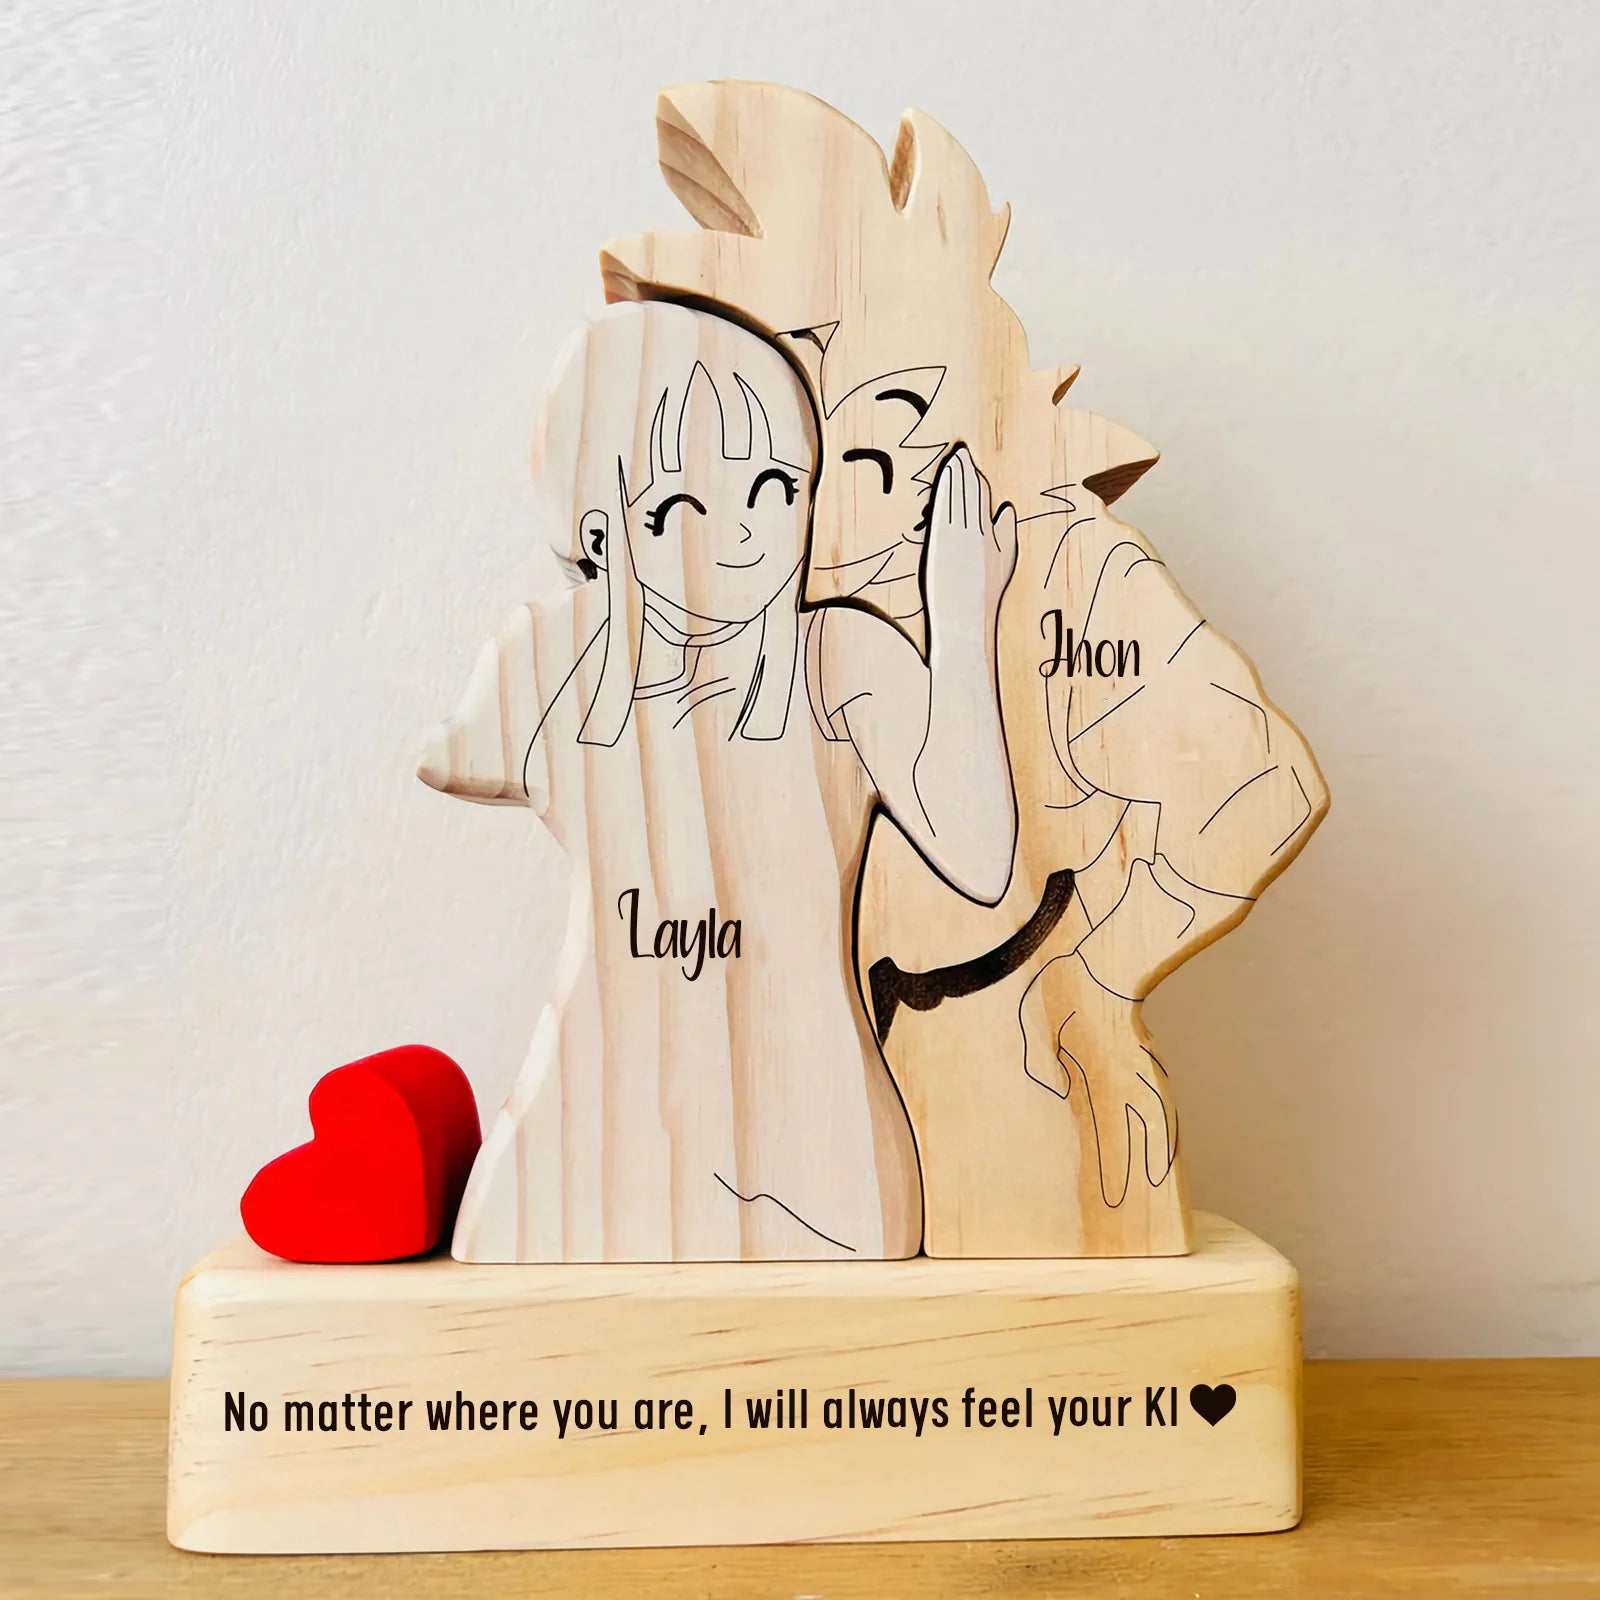 Couple - Cartoon Cute Character - Personalized Wooden Puzzle